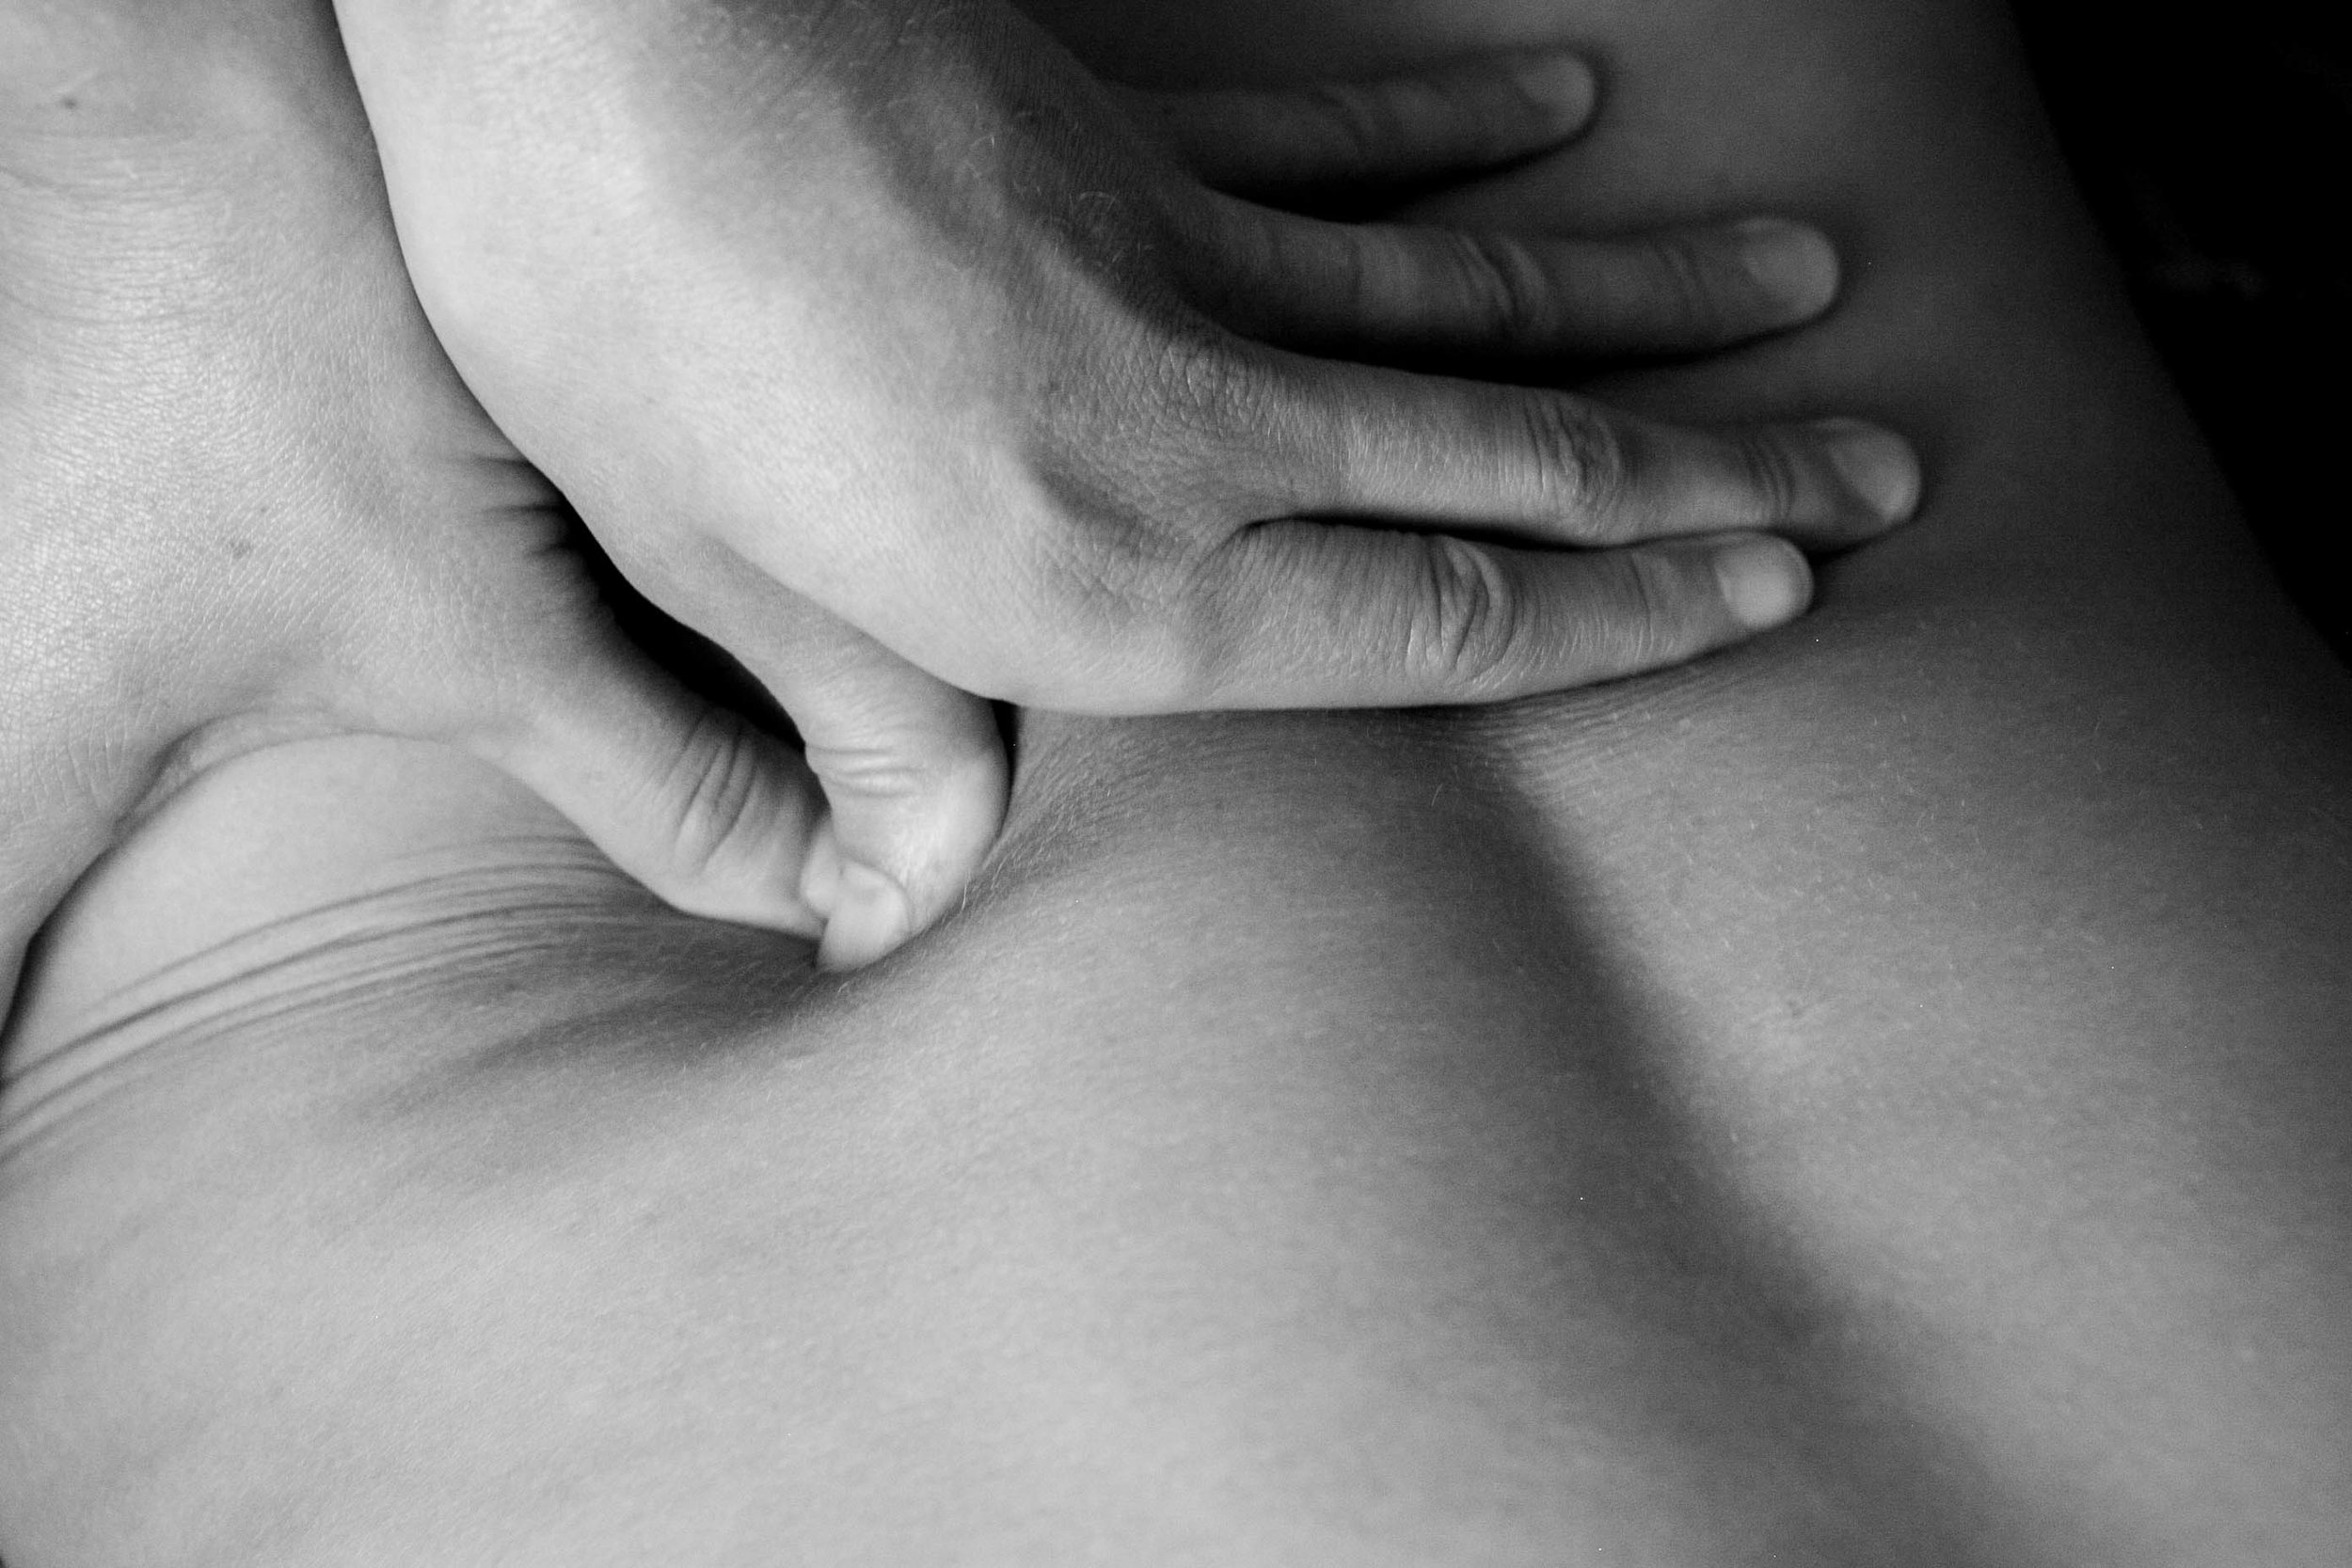 How can massage help to relieve back pain? - Urban Blog